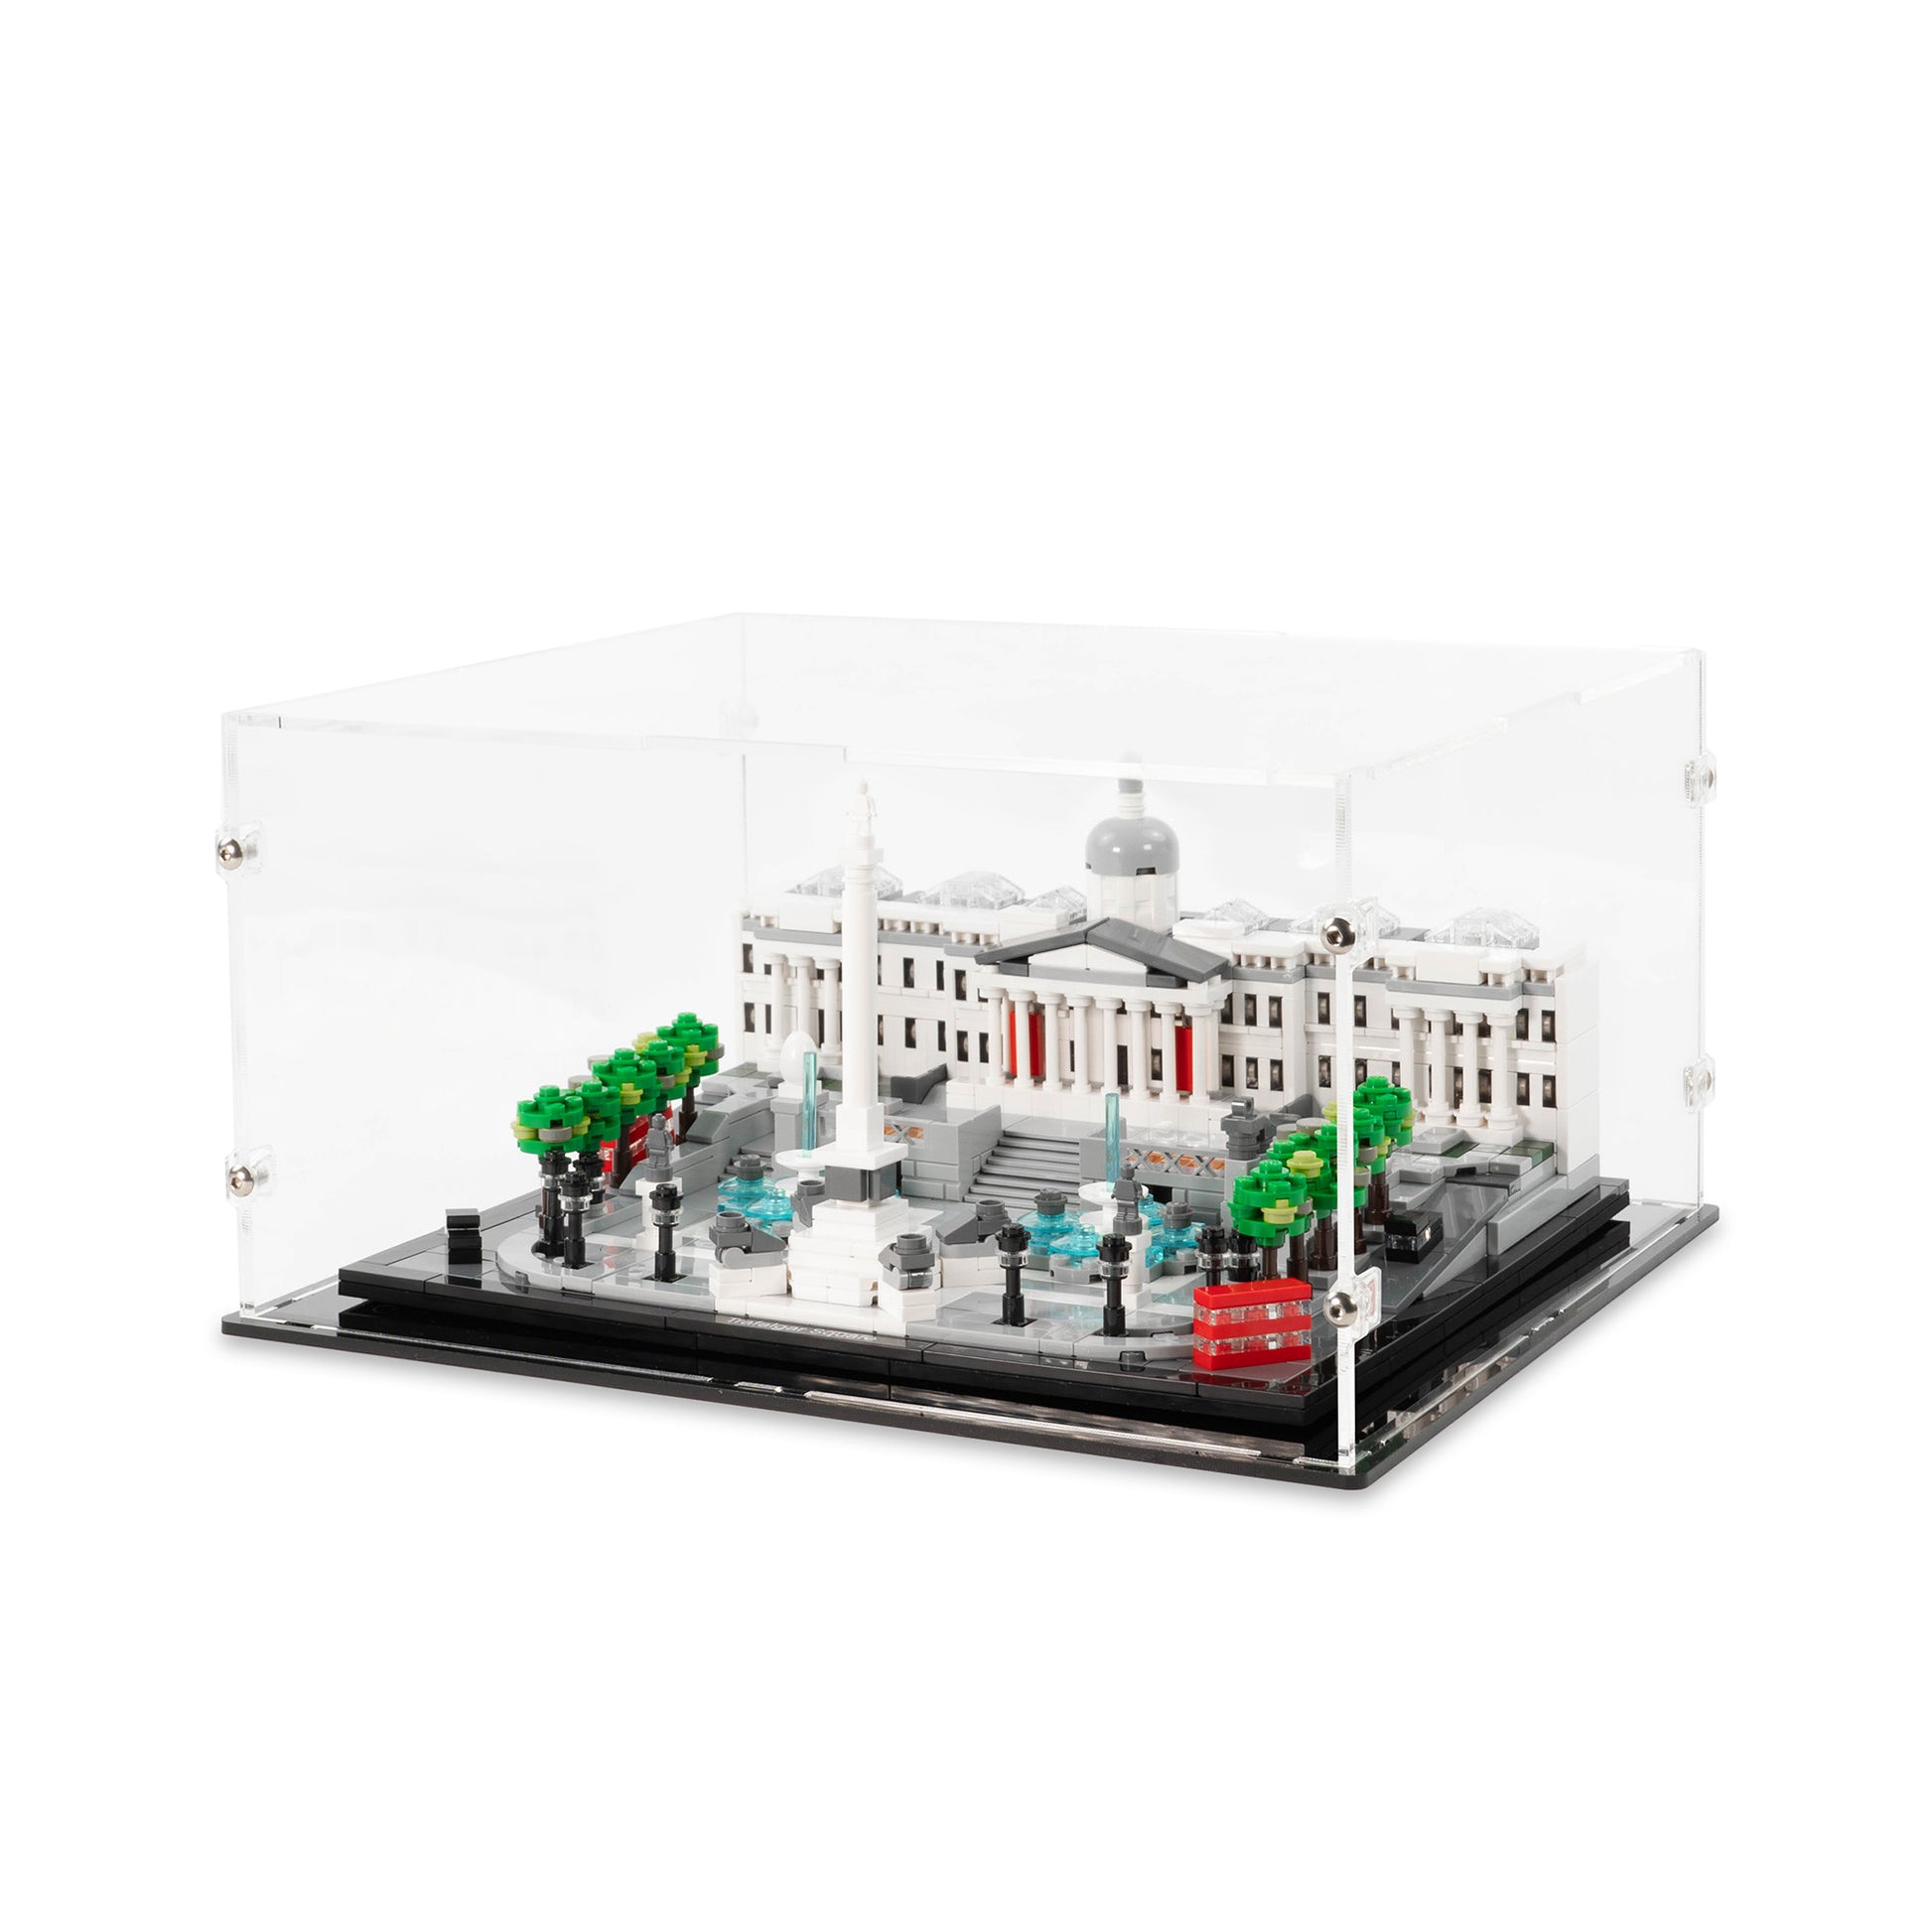 Angled top view of LEGO 21045 Trafalgar Square Display Case.